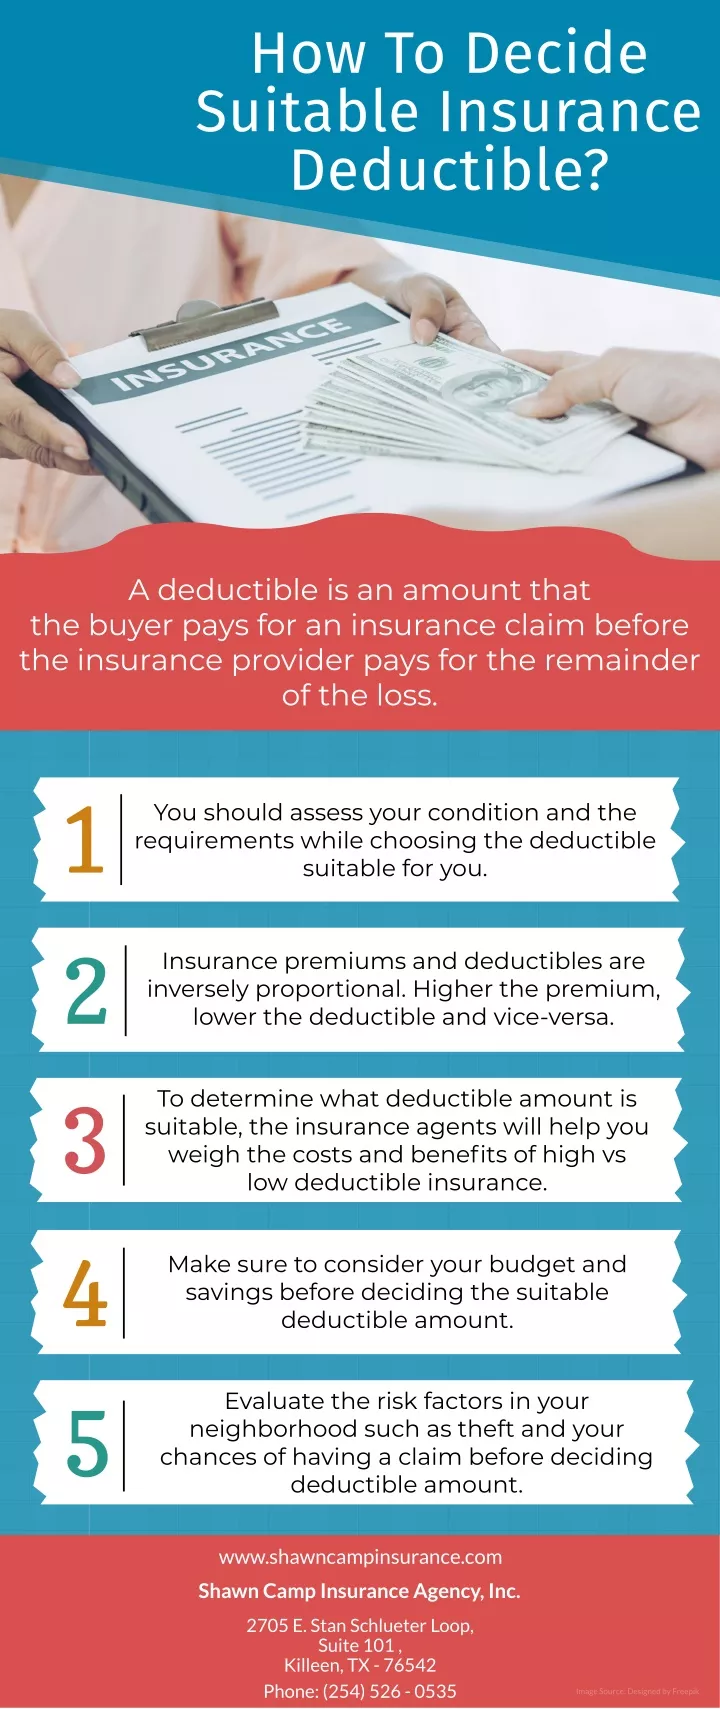 how to decide suitable insurance deductible